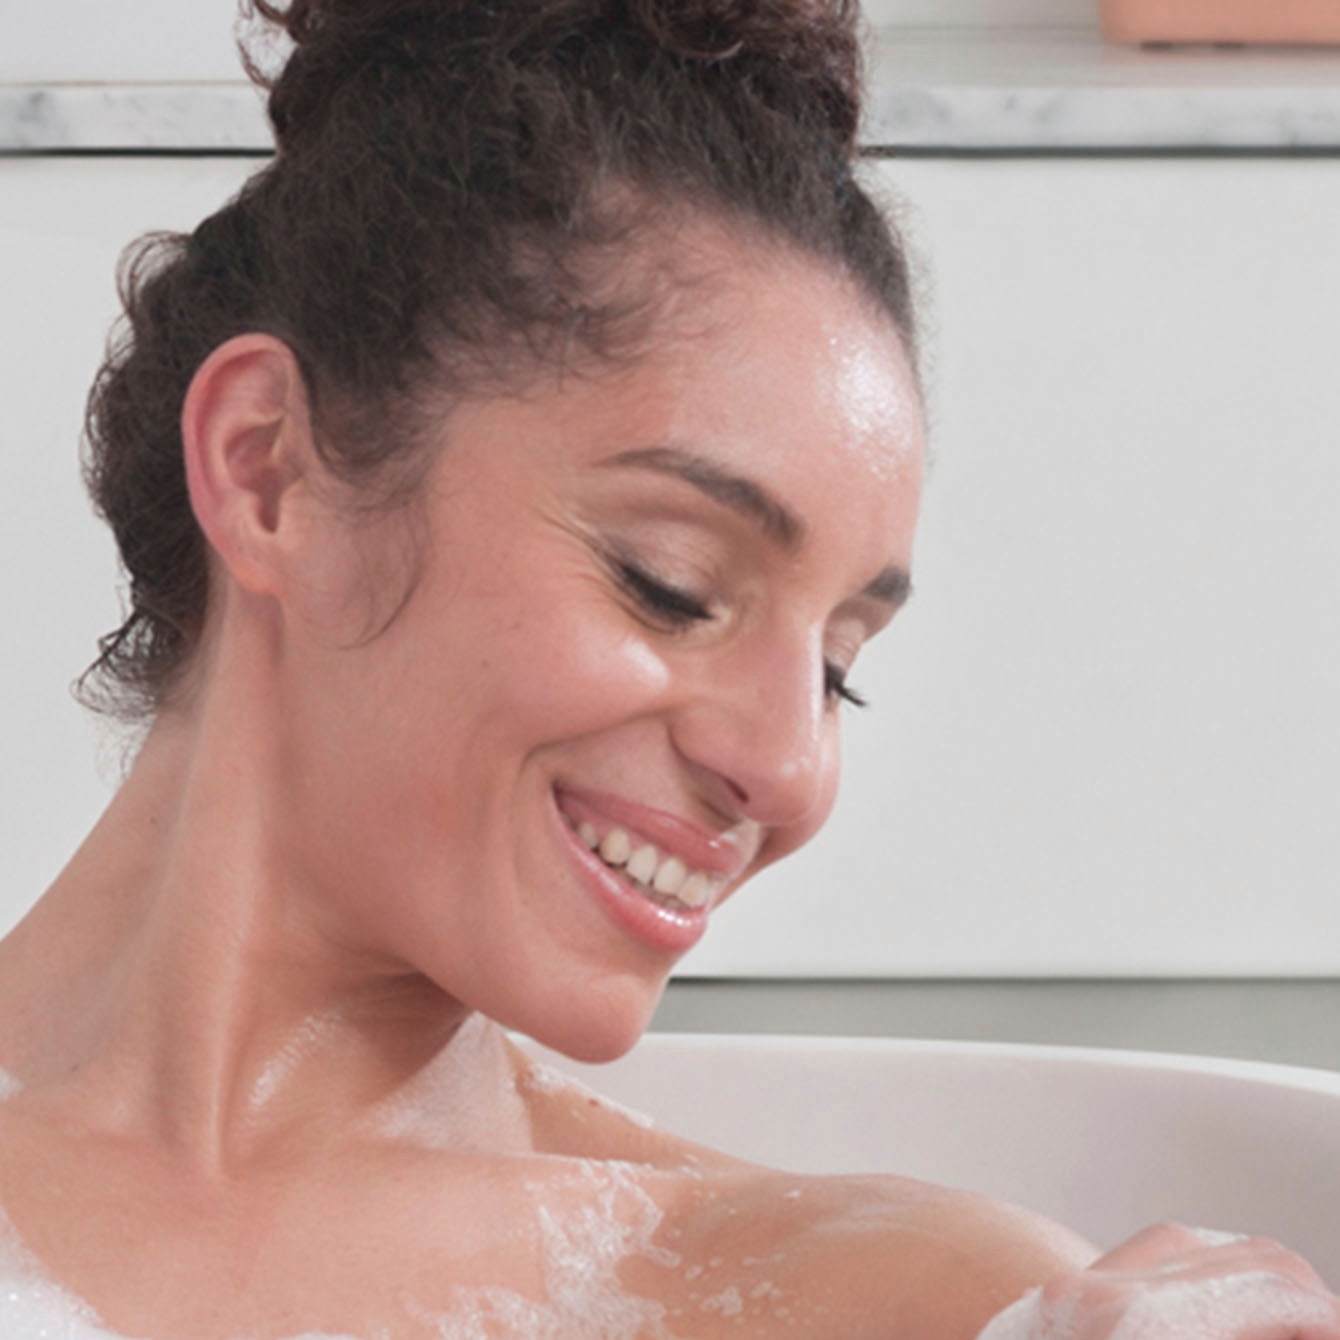 Skin secrets: a guide to skin care in the bath and shower